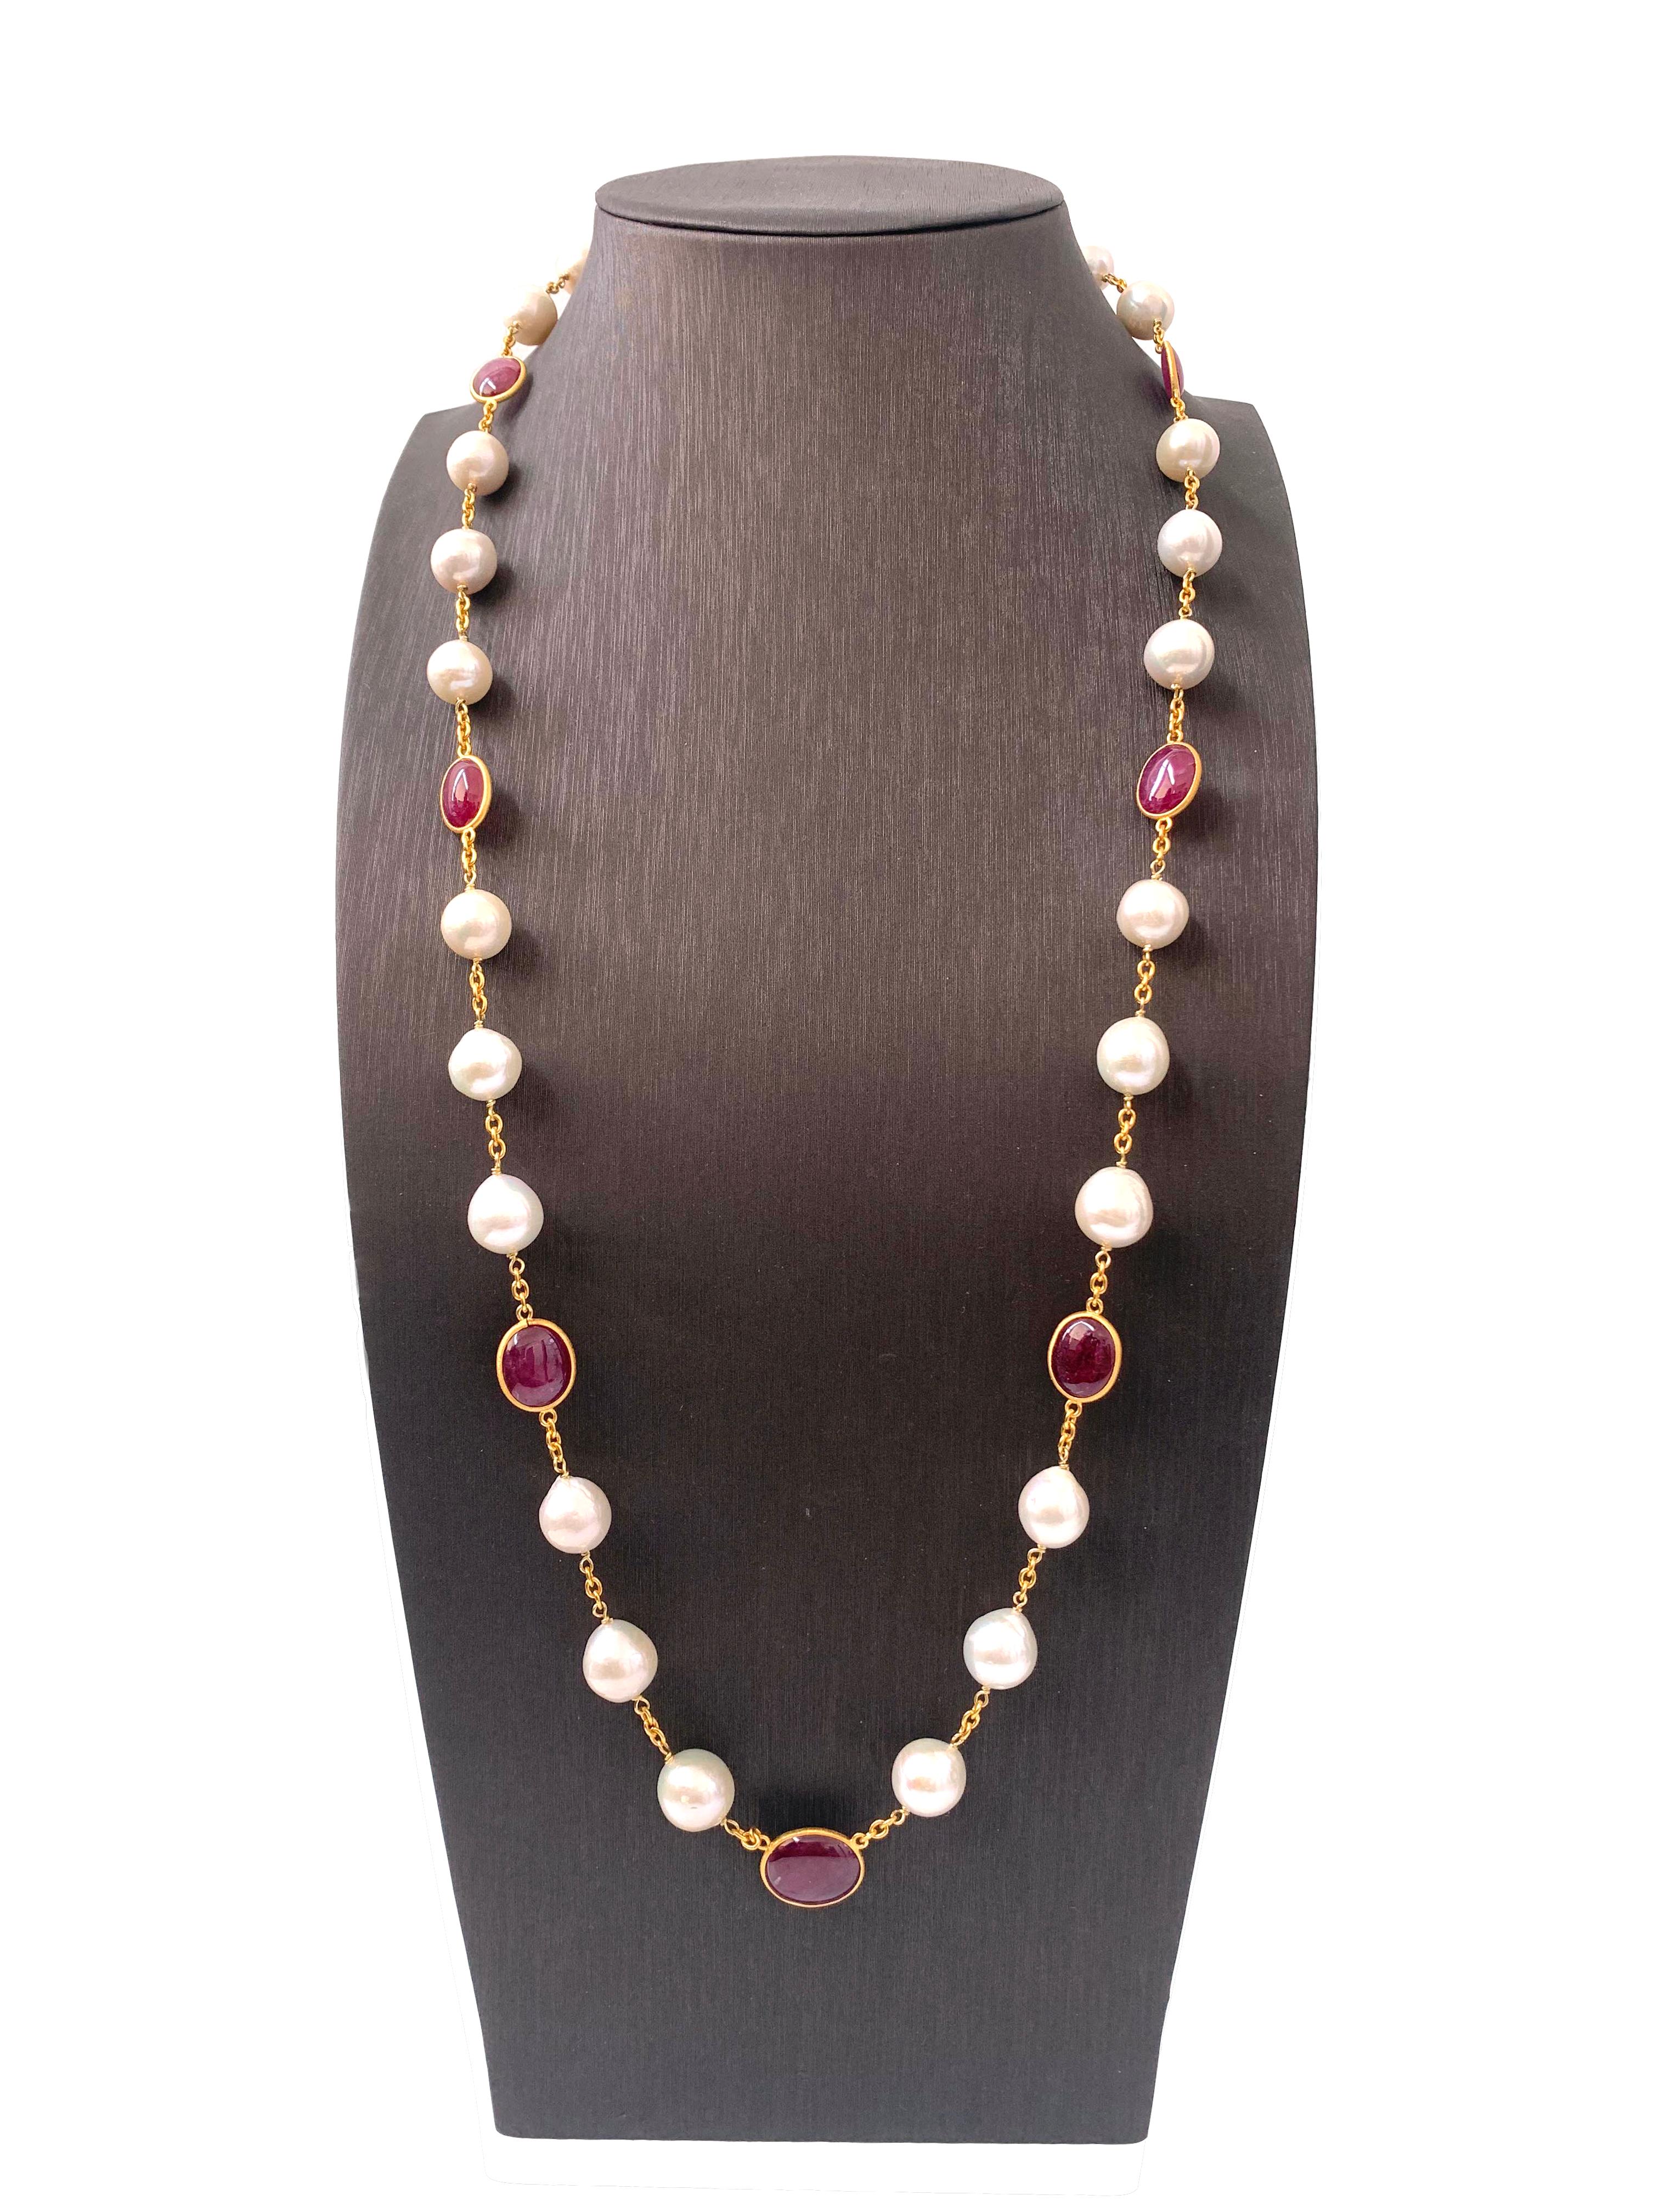 Contemporary Genuine Ruby and Cultured Baroque Pearl Long Station Necklace.

The necklace features 7 beautiful pink-ish oval cabochon-cut genuine rubies (86 carats total weight) and 24 high-luster genuine cultured baroque pearls. The pearls measure